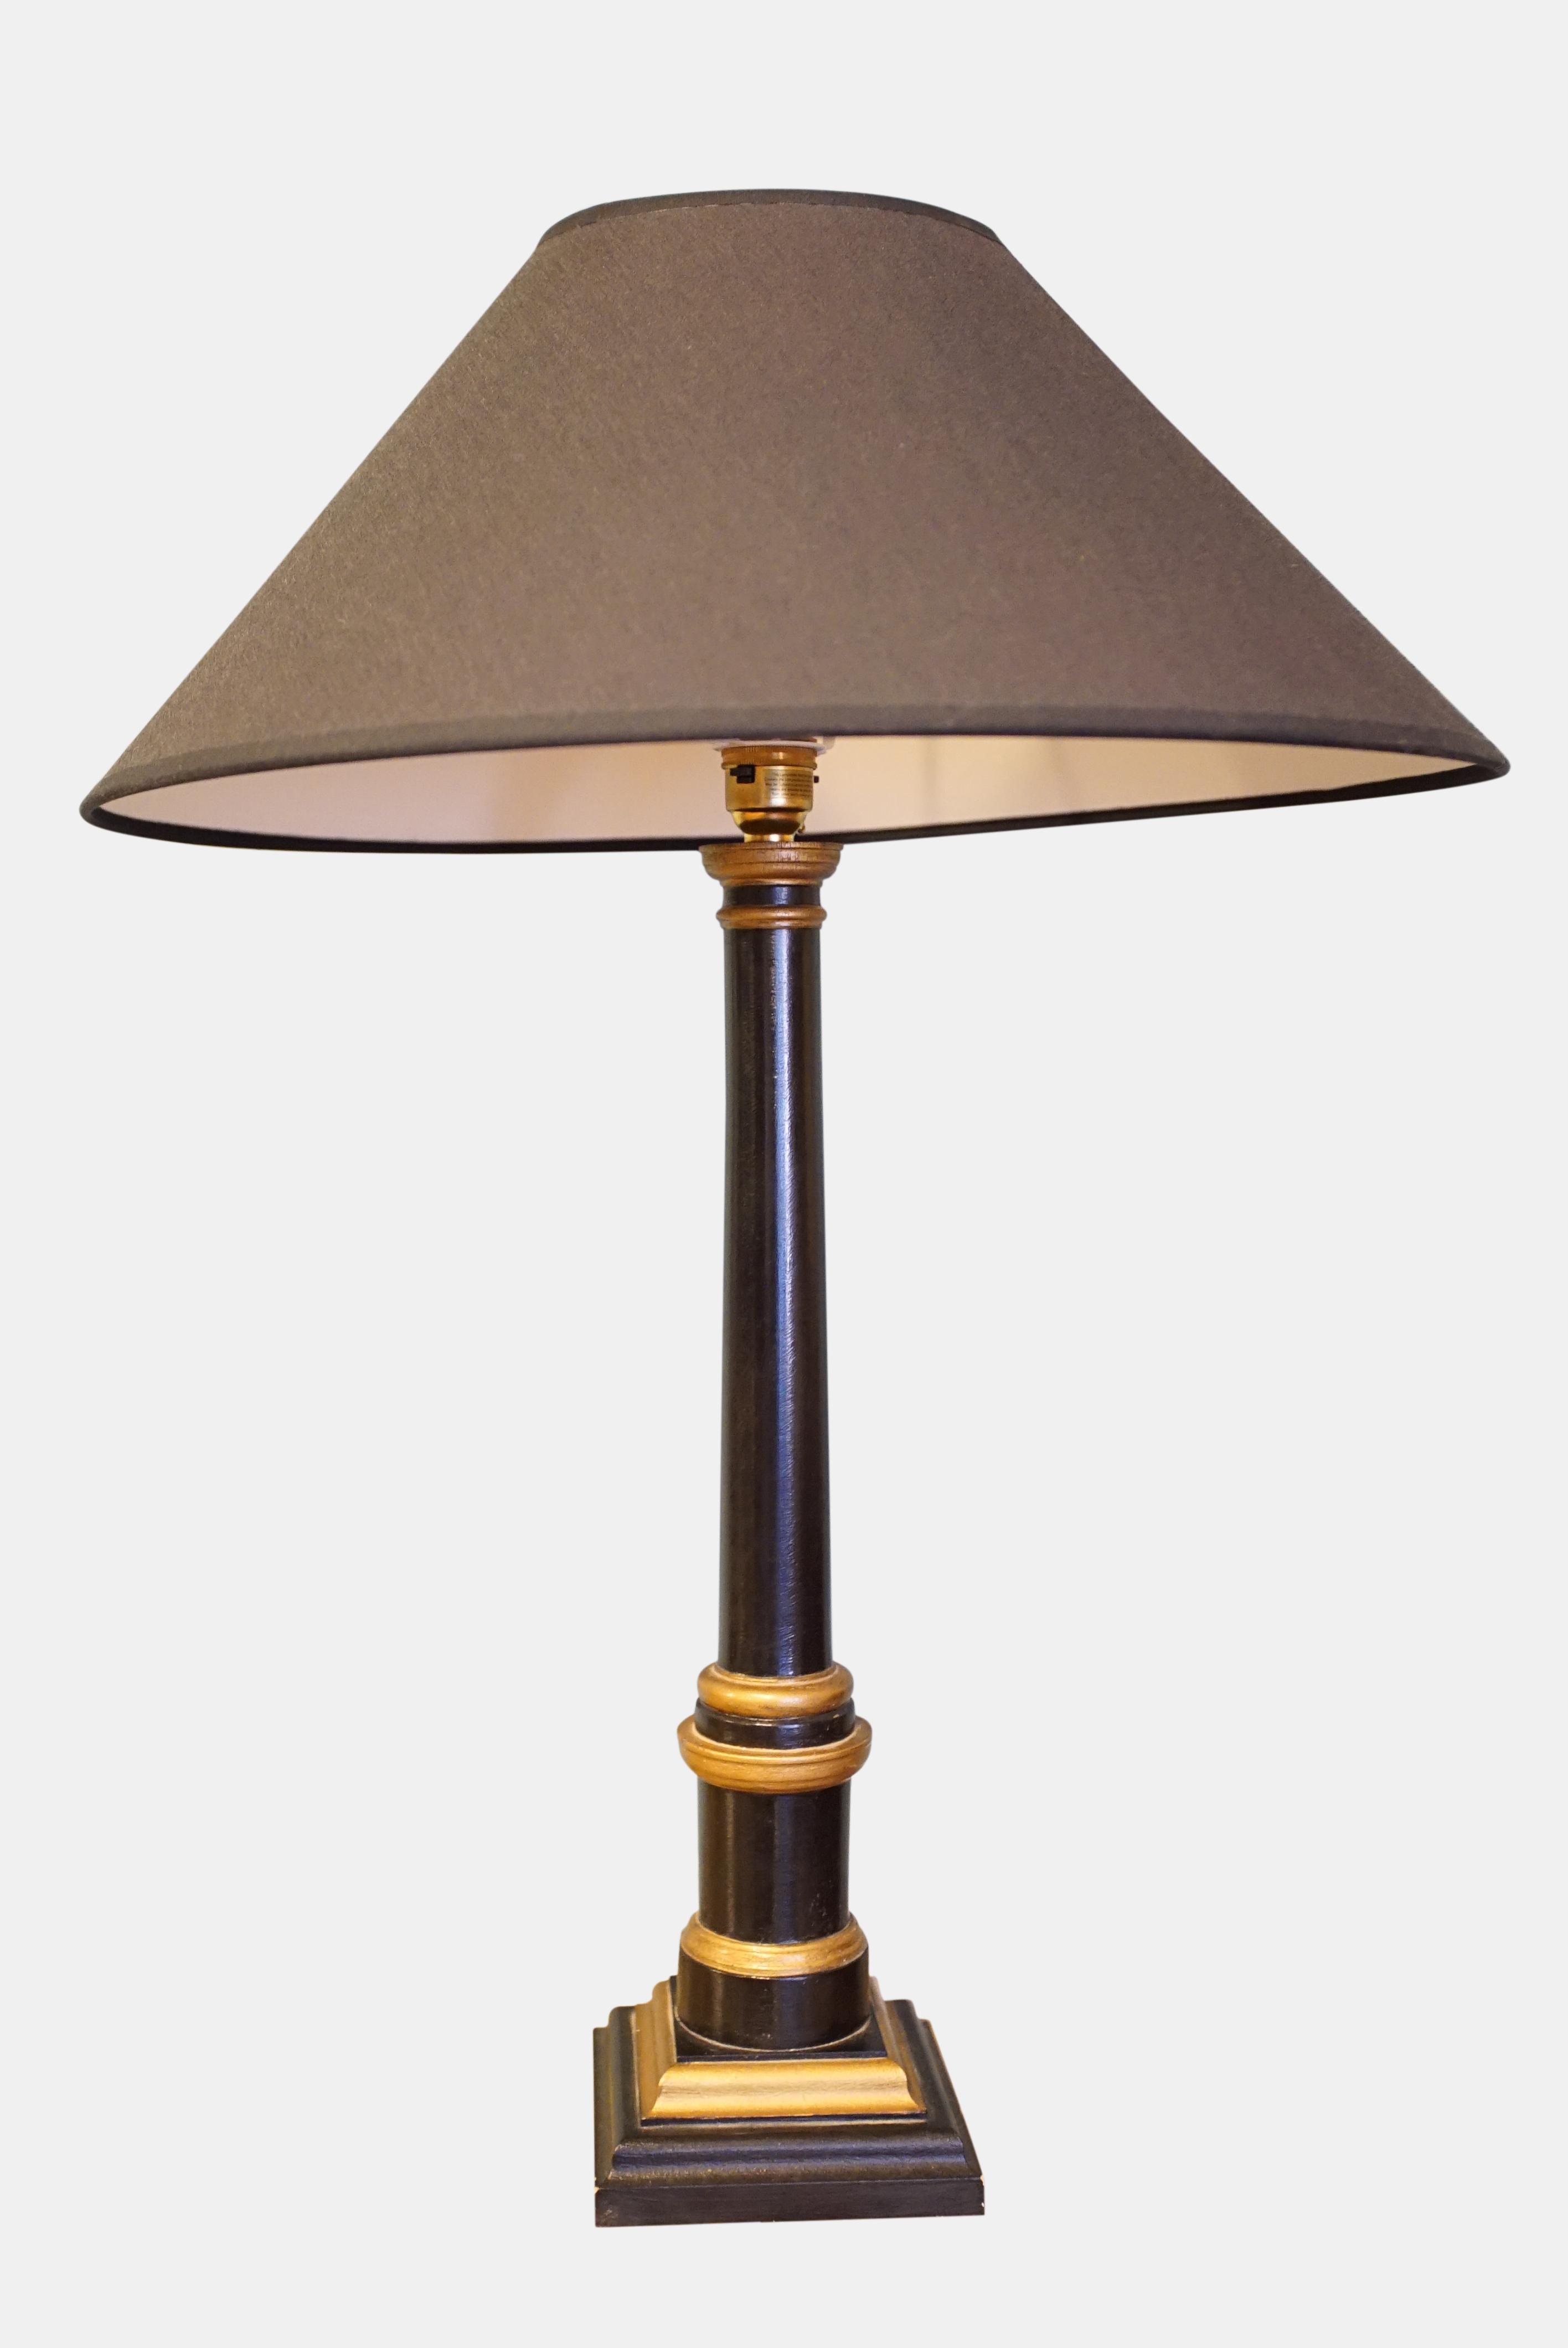 A pair of modern turned wood, ebonised and parcel-gilt table lamps,

circa 1980.